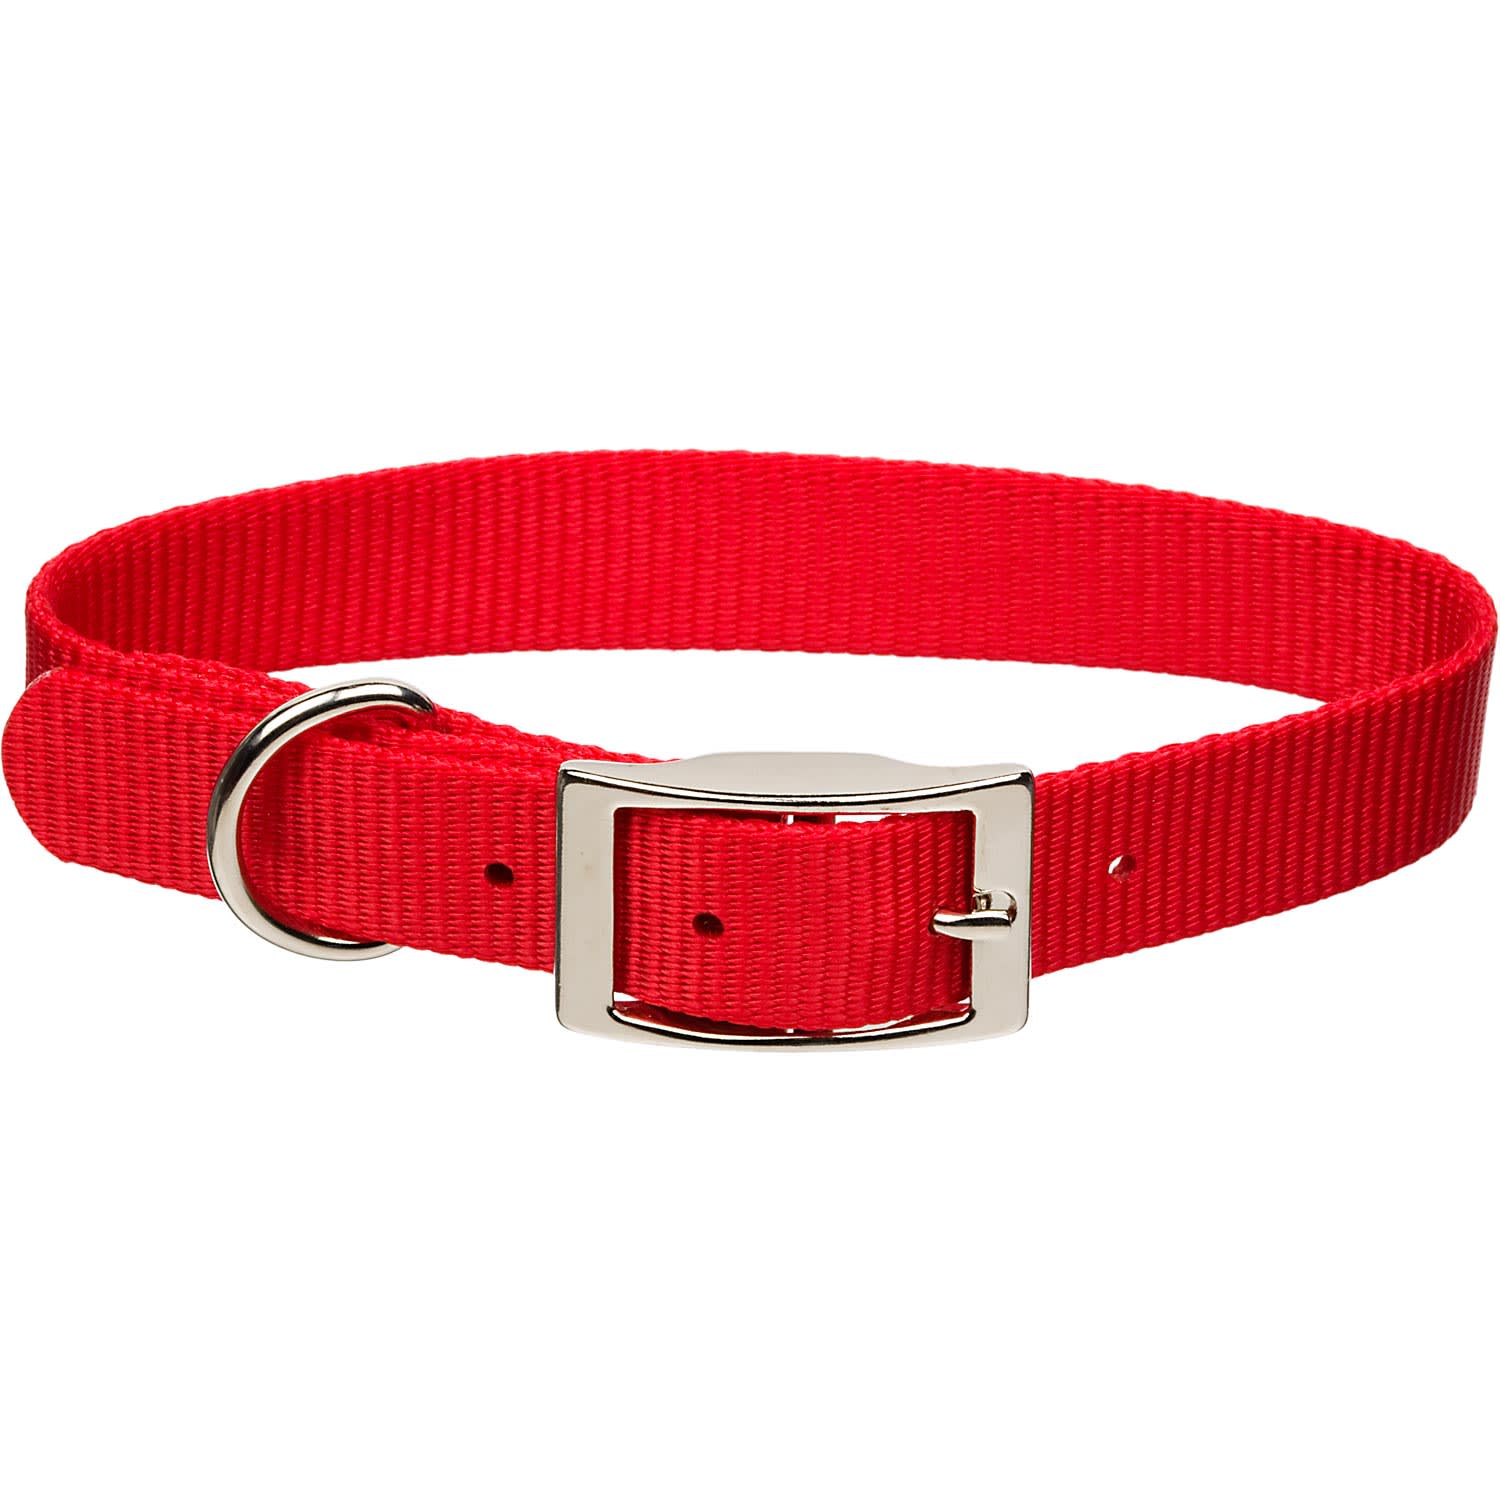 Coastal Pet Metal Buckle Nylon Personalized Dog Collar in Red, 5/8 Width